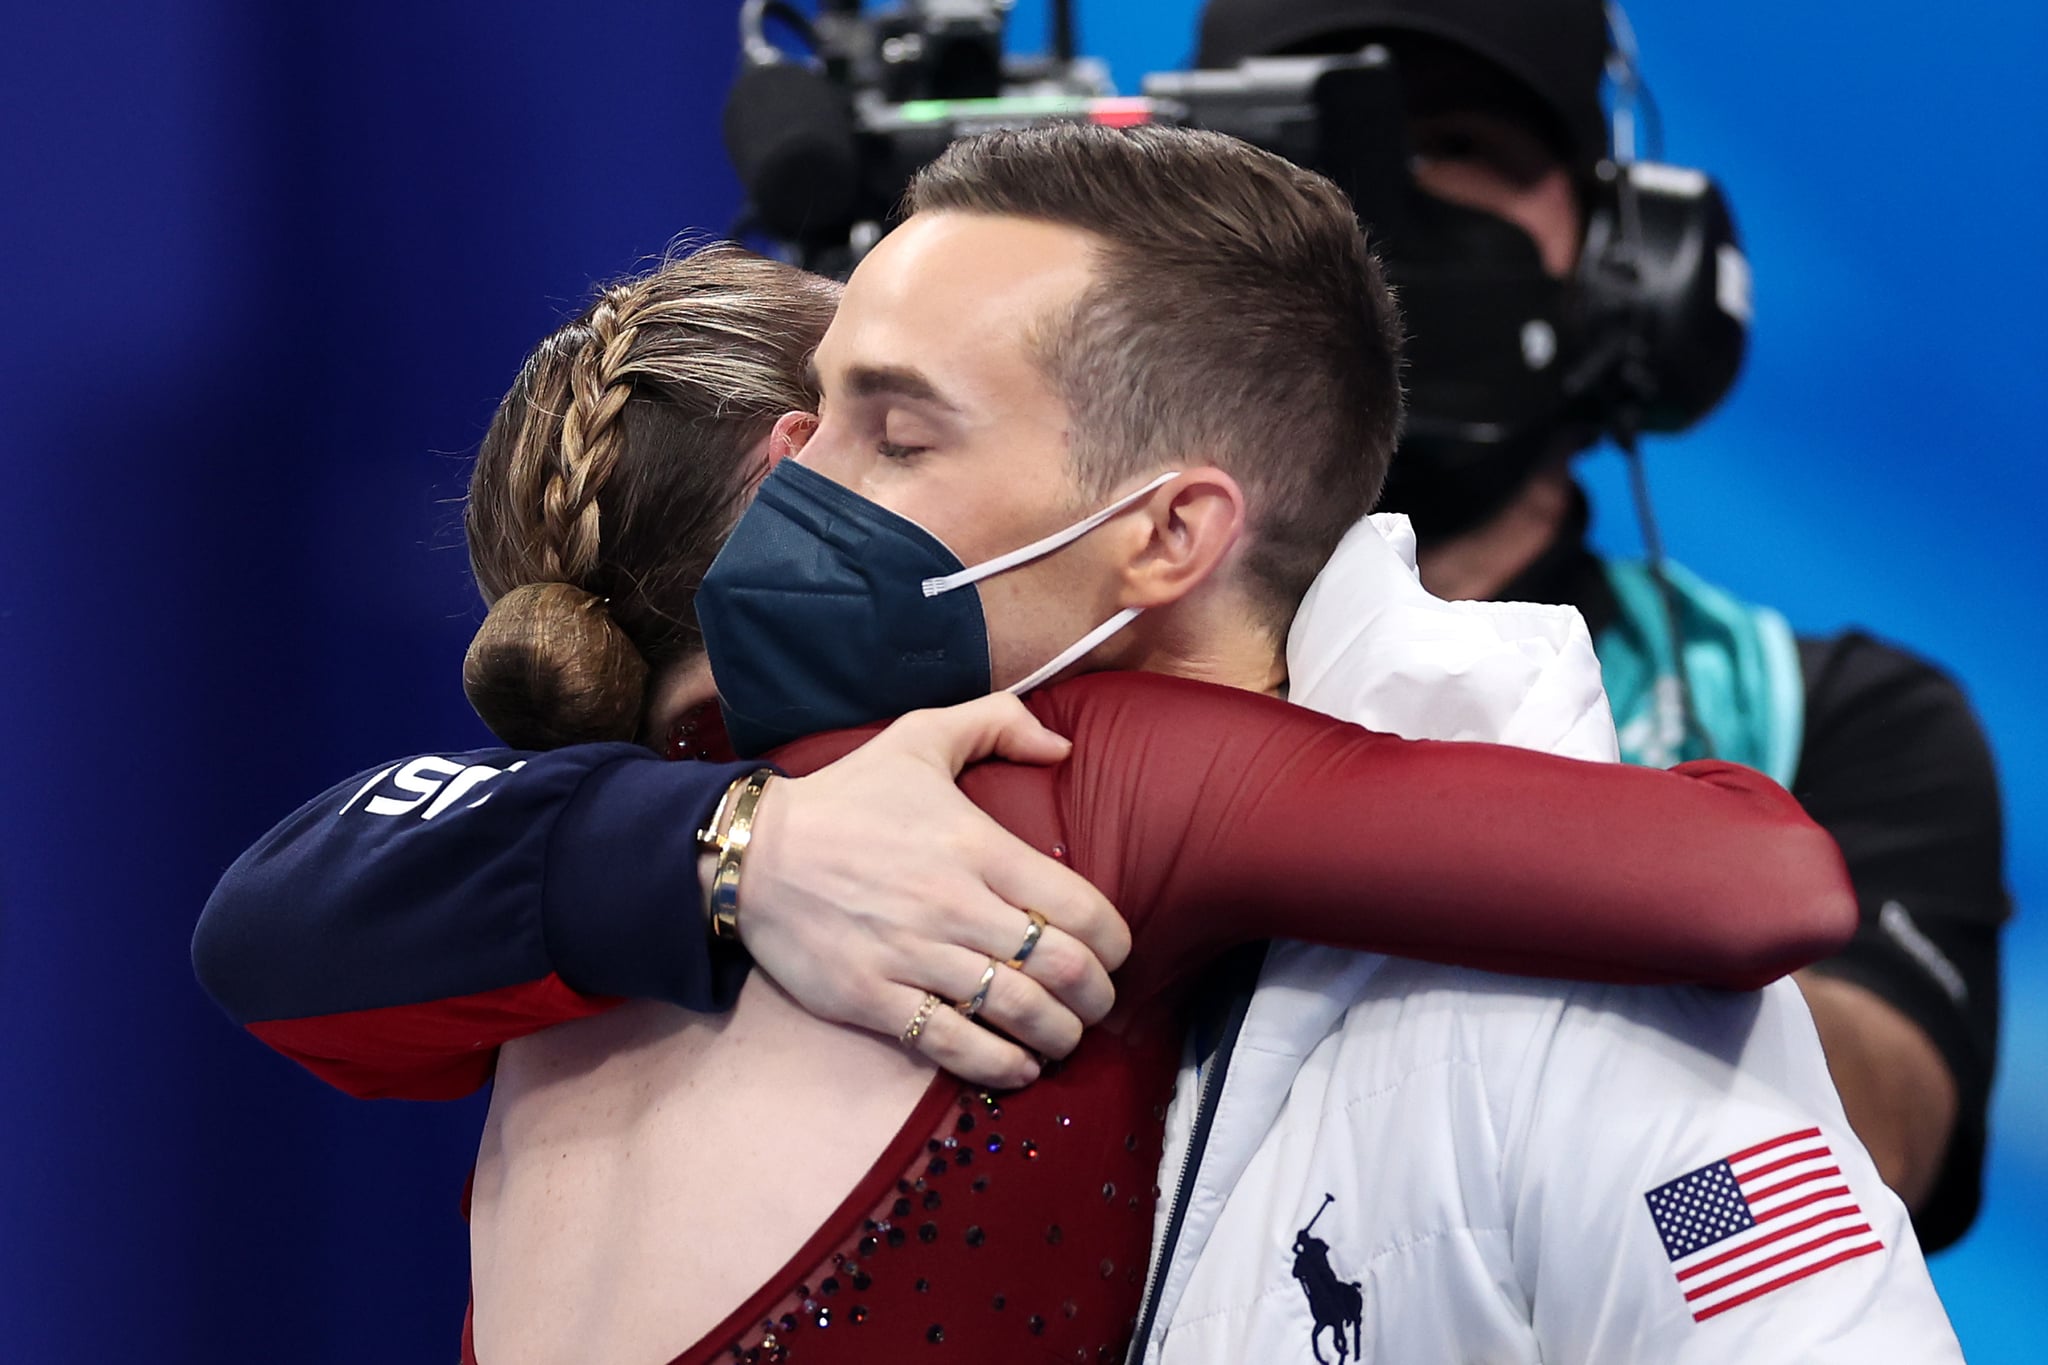 BEIJING, CHINA - FEBRUARY 17: Mariah Bell of Team United States reacts with coach Adam Rippon after skating during the Women Single Skating Free Skating on day thirteen of the Beijing 2022 Winter Olympic Games at Capital Indoor Stadium on February 17, 2022 in Beijing, China. (Photo by Matthew Stockman/Getty Images)